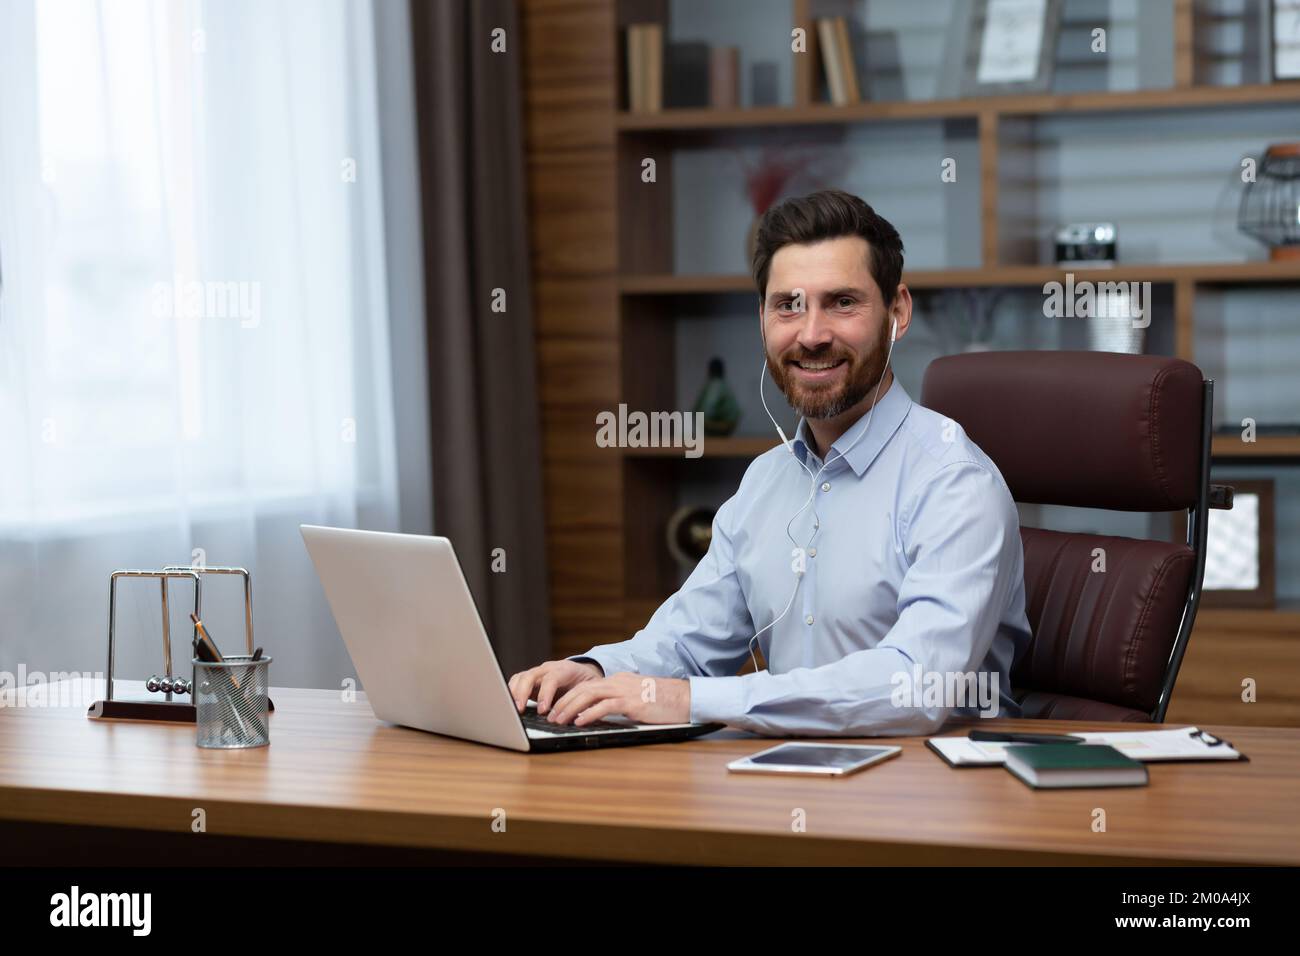 Portrait of successful businessman investor inside office, mature man smiling and looking at camera using laptop at work and wearing white headphones for video call, Stock Photo